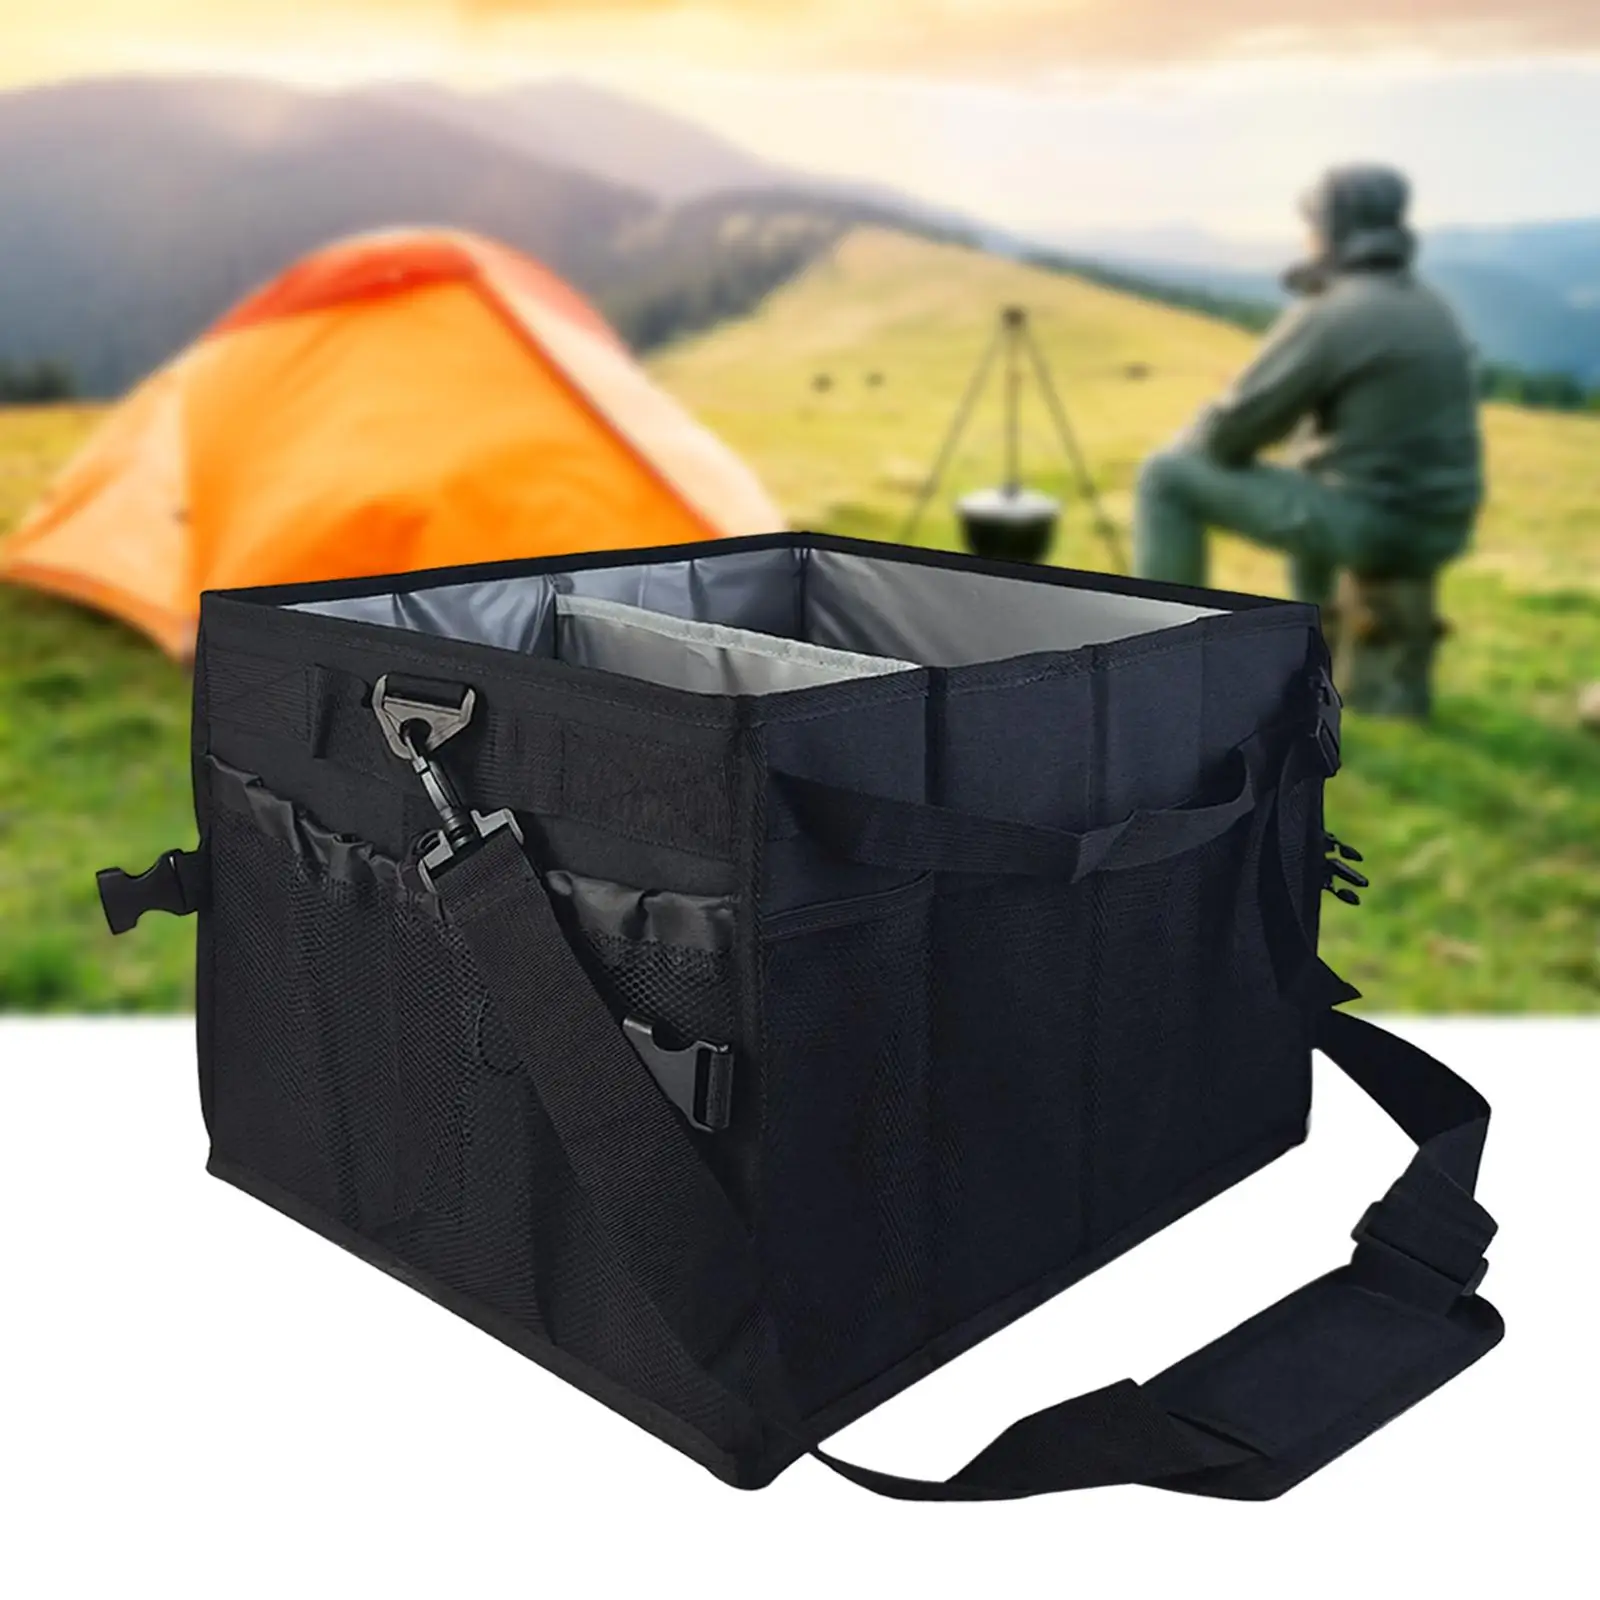 Portable BBQ Tool Storage Bag Outdoor Picnic Cooking Tools Bag Organizer Grill Tool Carrying Bag Waterproof for Trip Camping RV